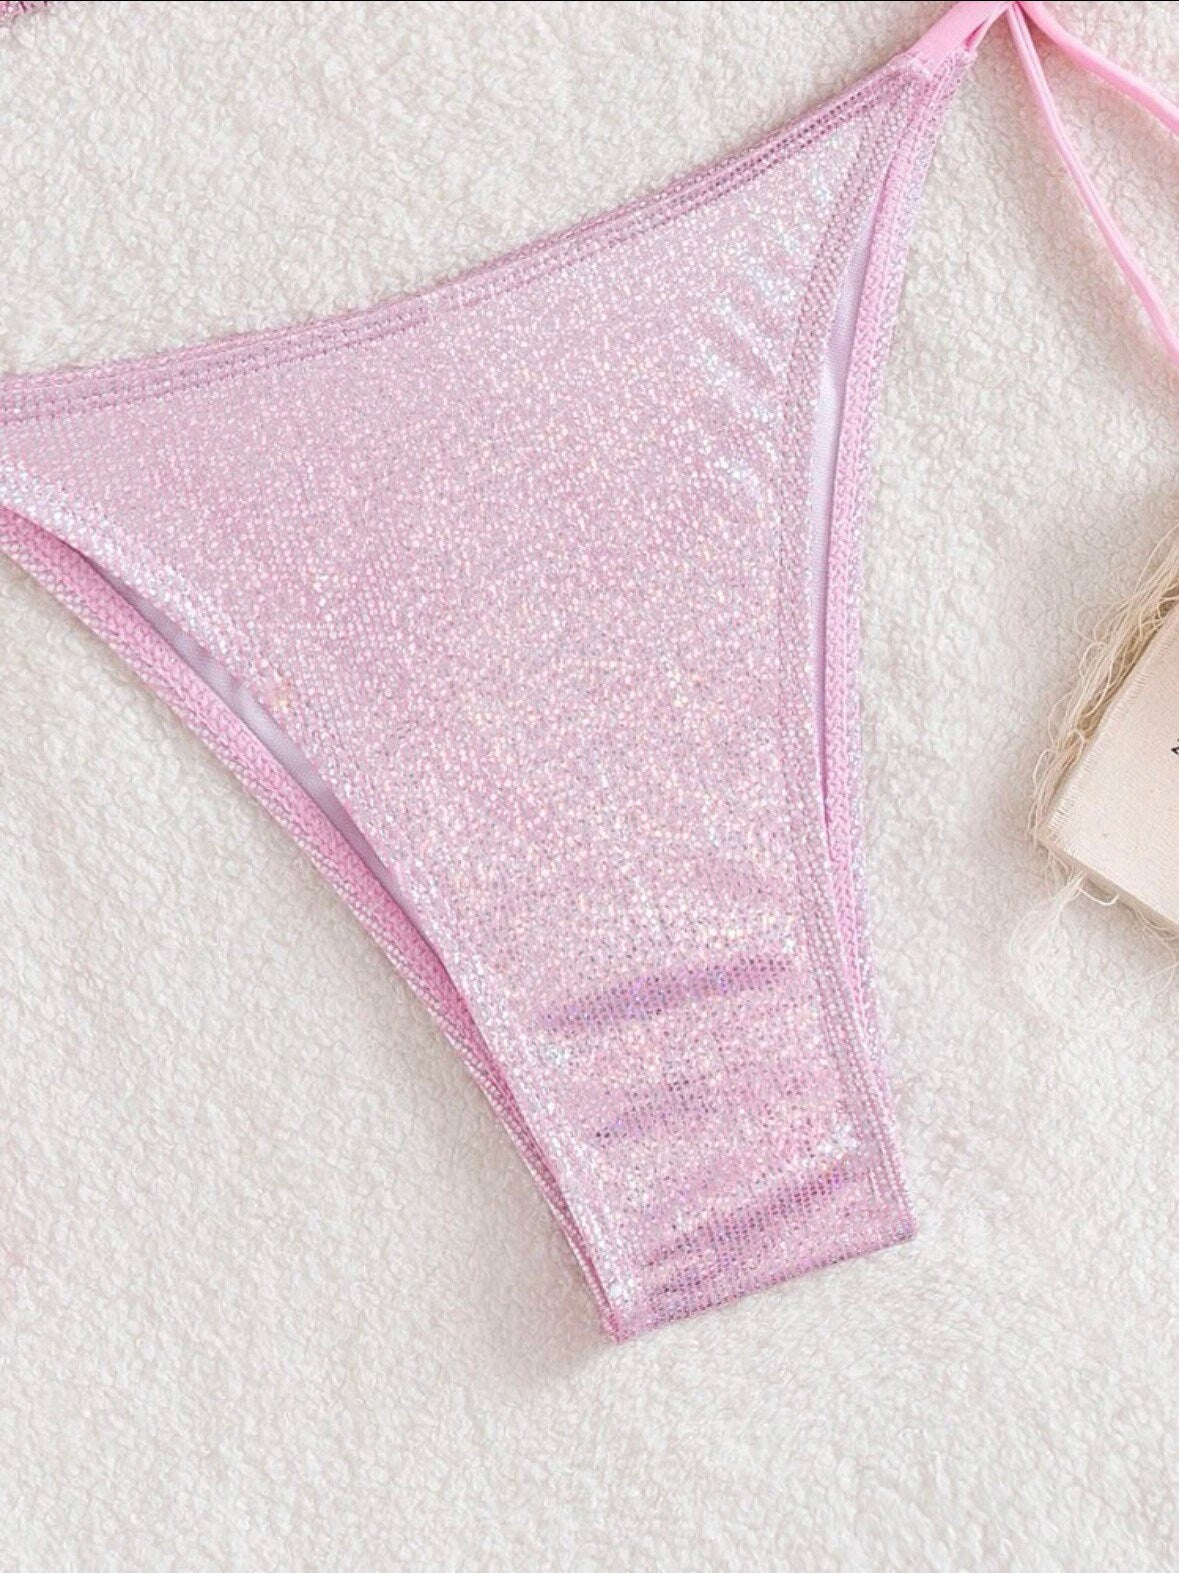 The Metallic pink glitter sparkle swim bikini with tie sides and sparkle pink print triangle halter top tie and bottoms swimsuit set